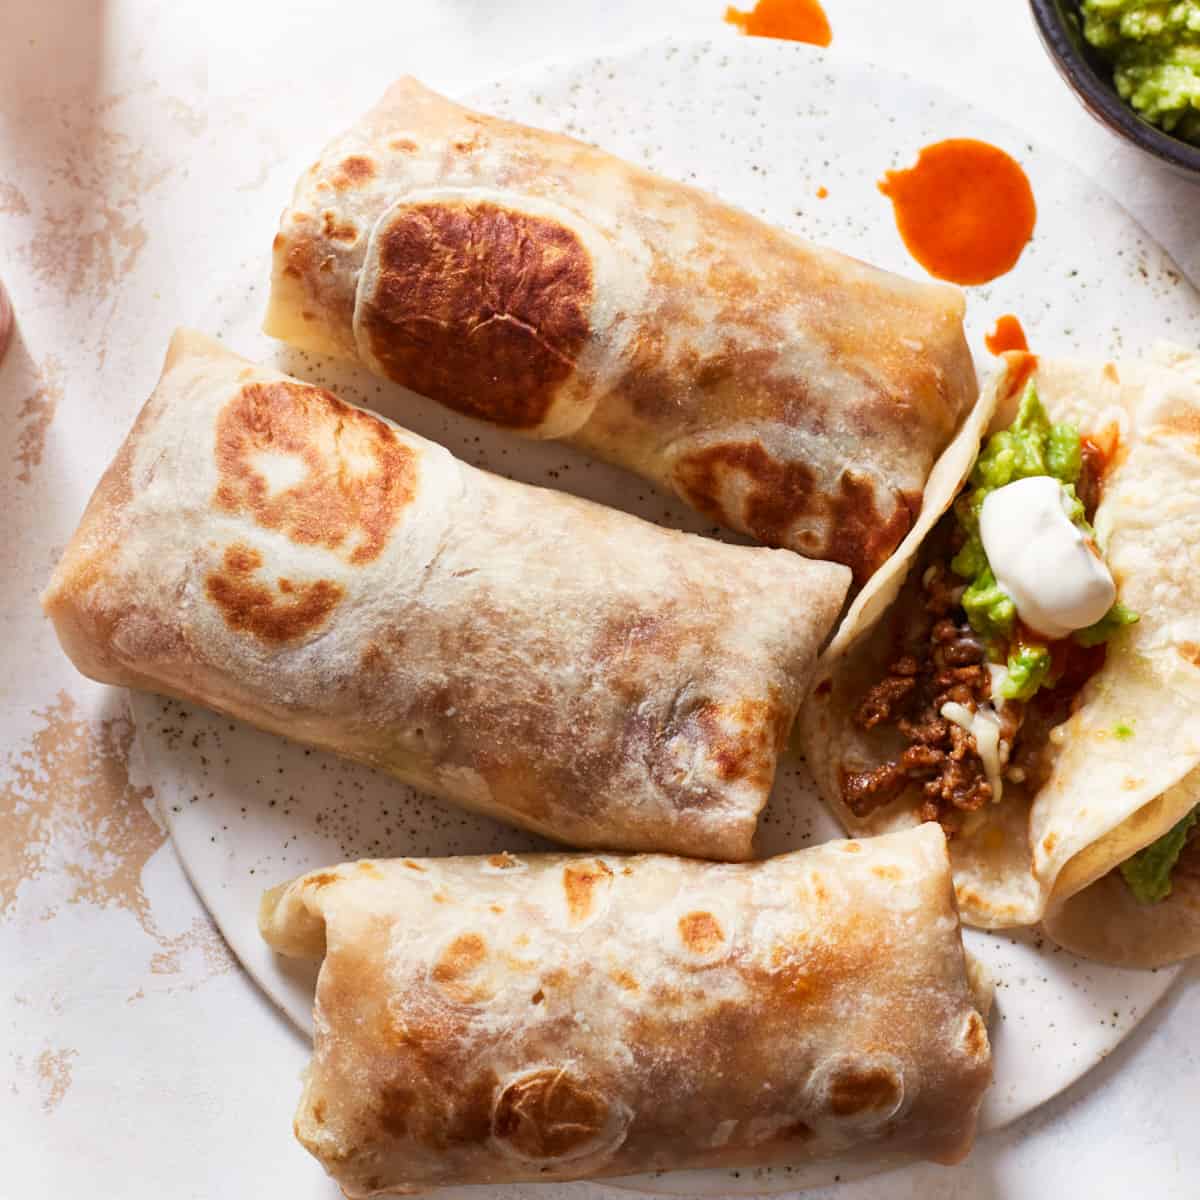 Three burritos and one soft taco filled with beef on a serving plat